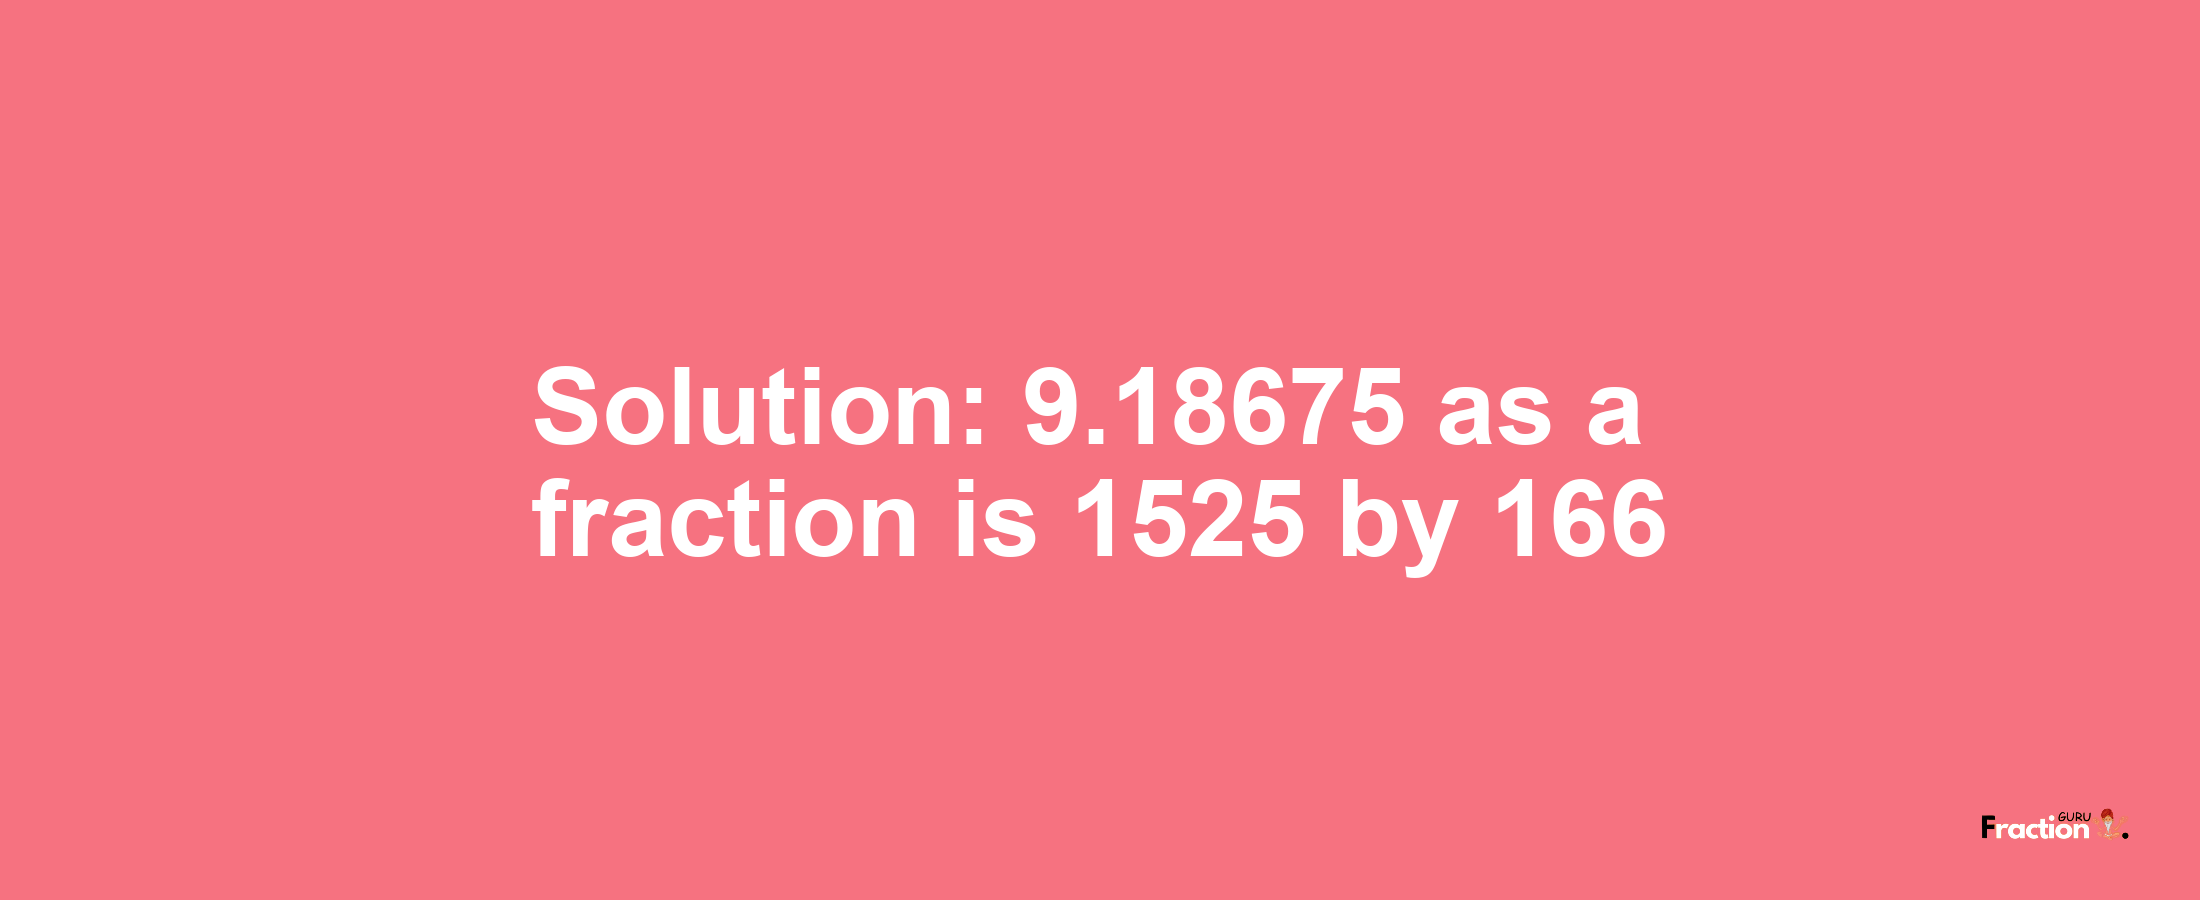 Solution:9.18675 as a fraction is 1525/166